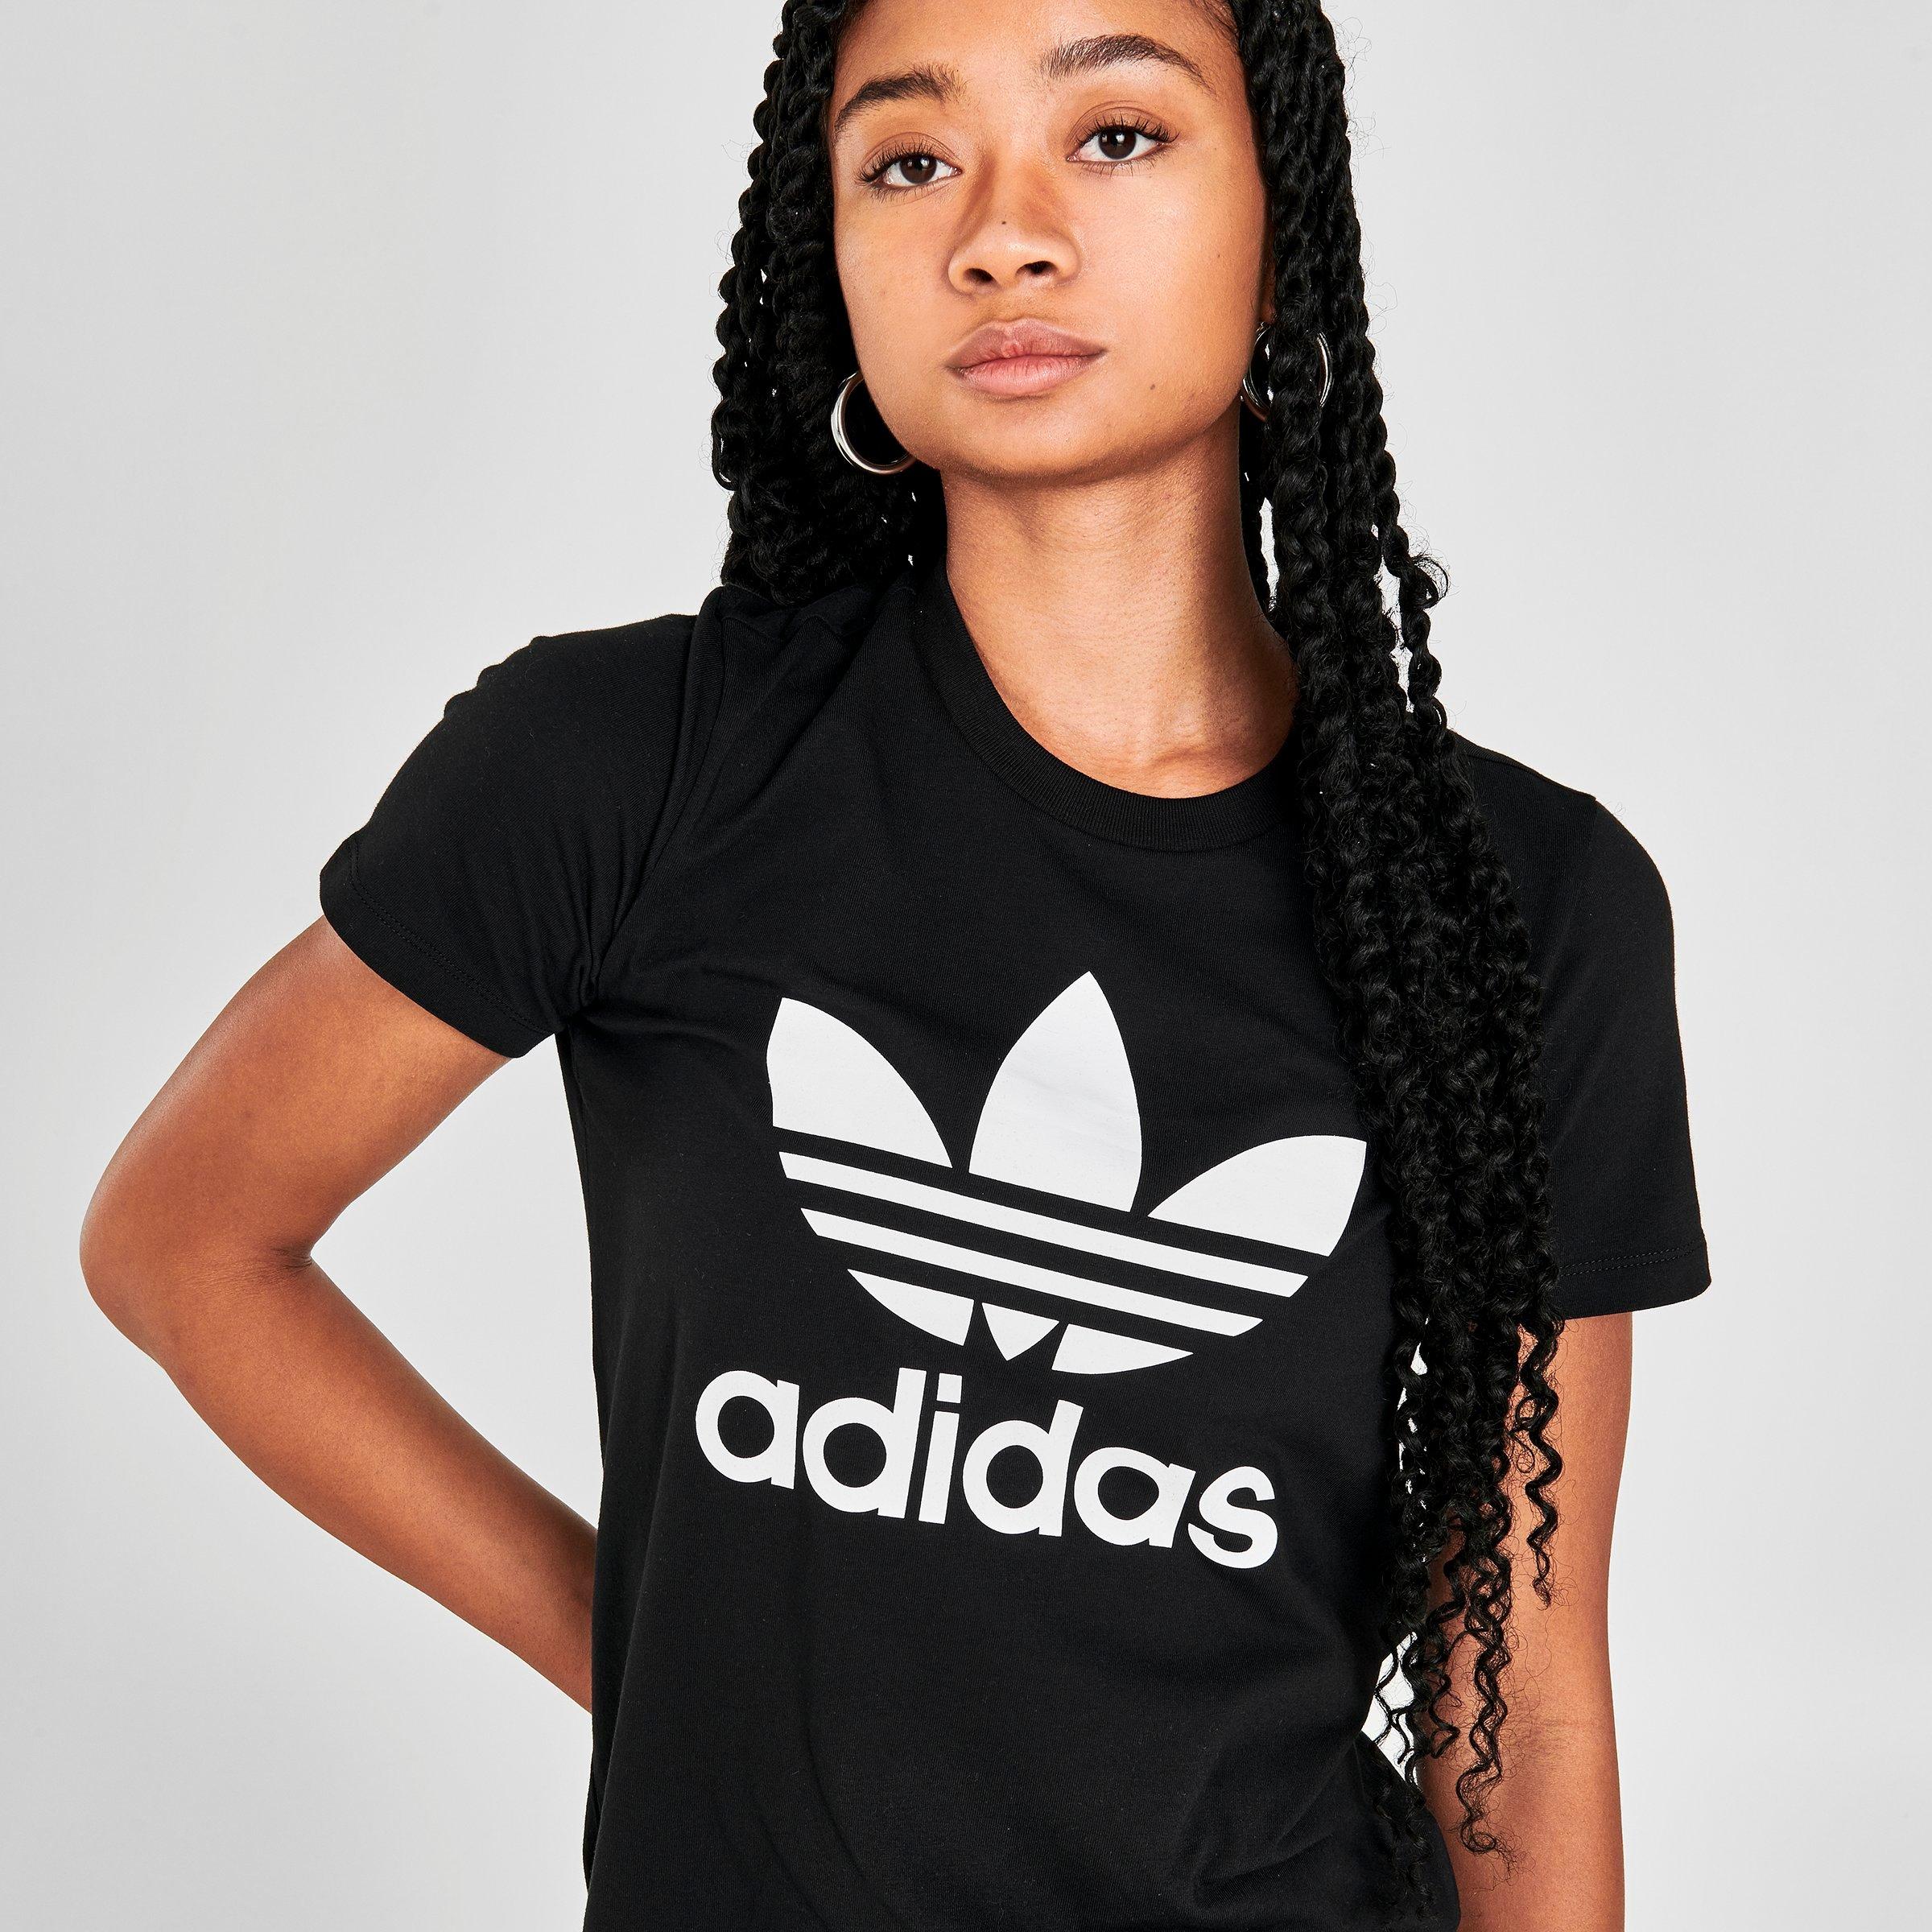 adidas women outfit